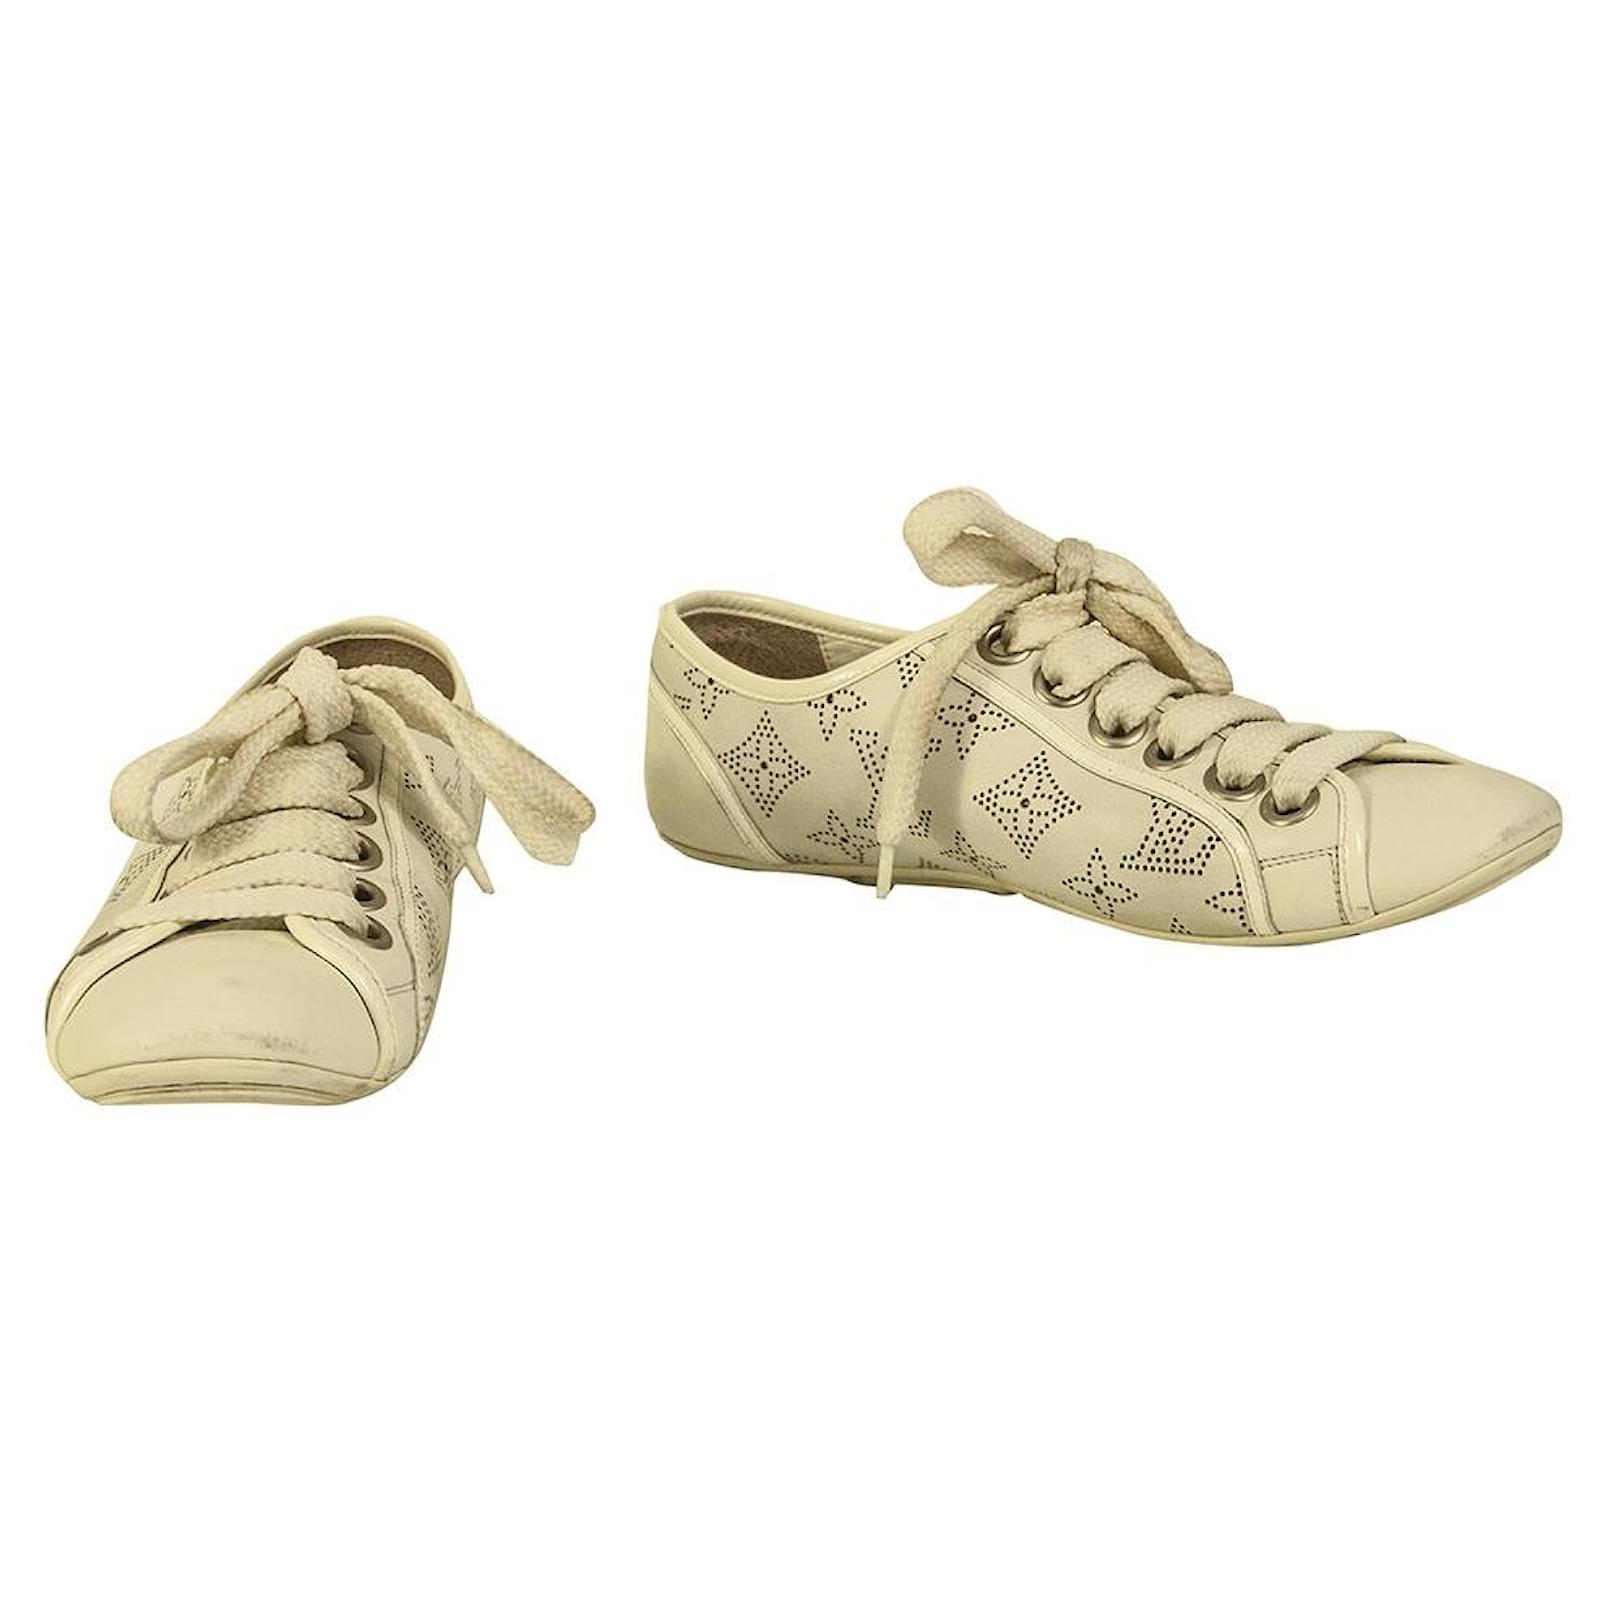 Louis Vuitton White Monogram Canvas and Leather Lace Up Sneakers Size 36.5